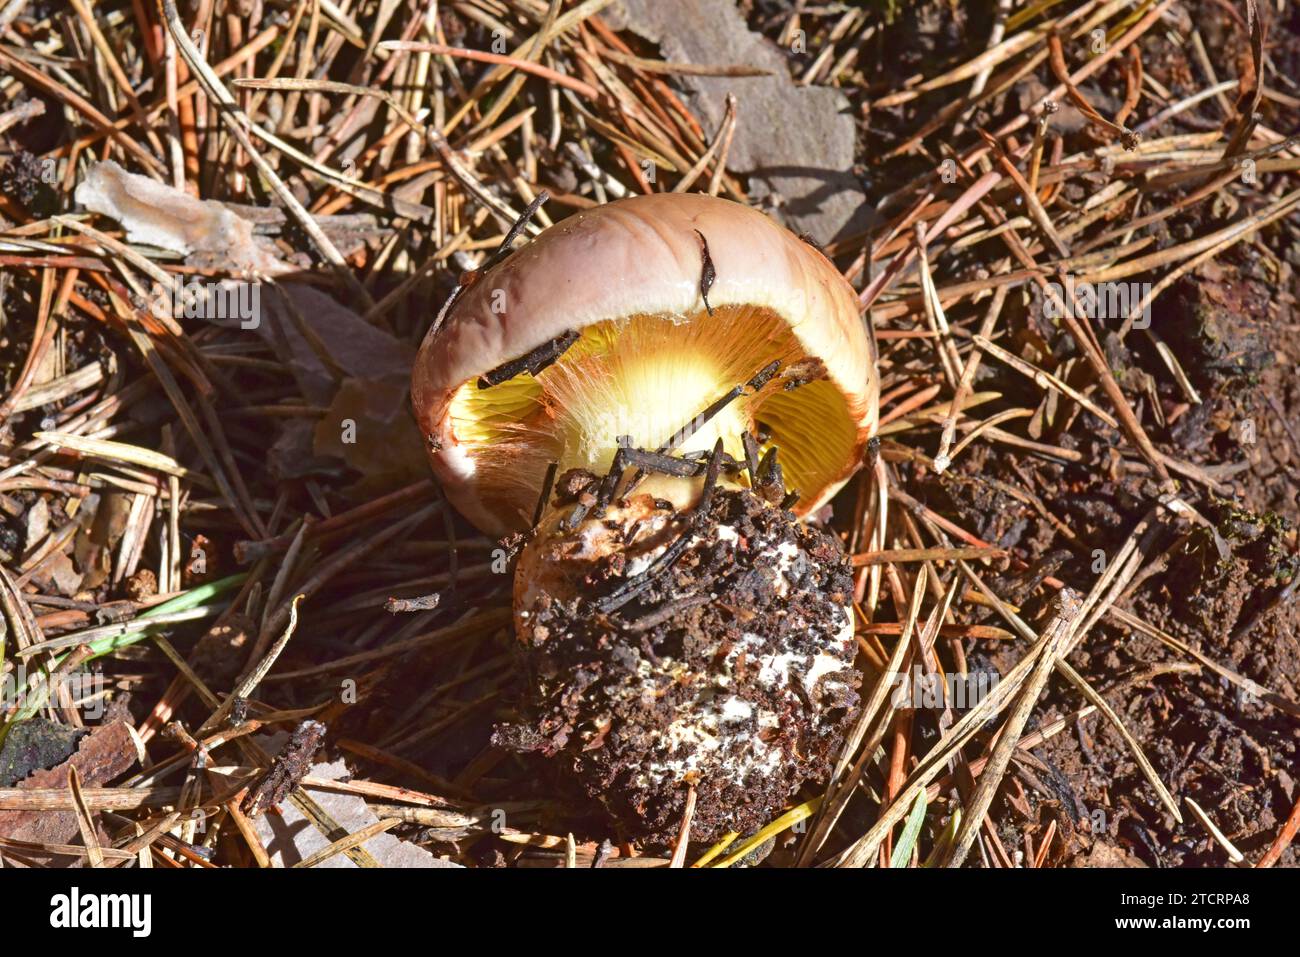 Cortinarius odorifer is a fungus that grows in coniferous forests. This photo was taken in Serra de Busa, Lleida province, Catalonia, Spain. Stock Photo